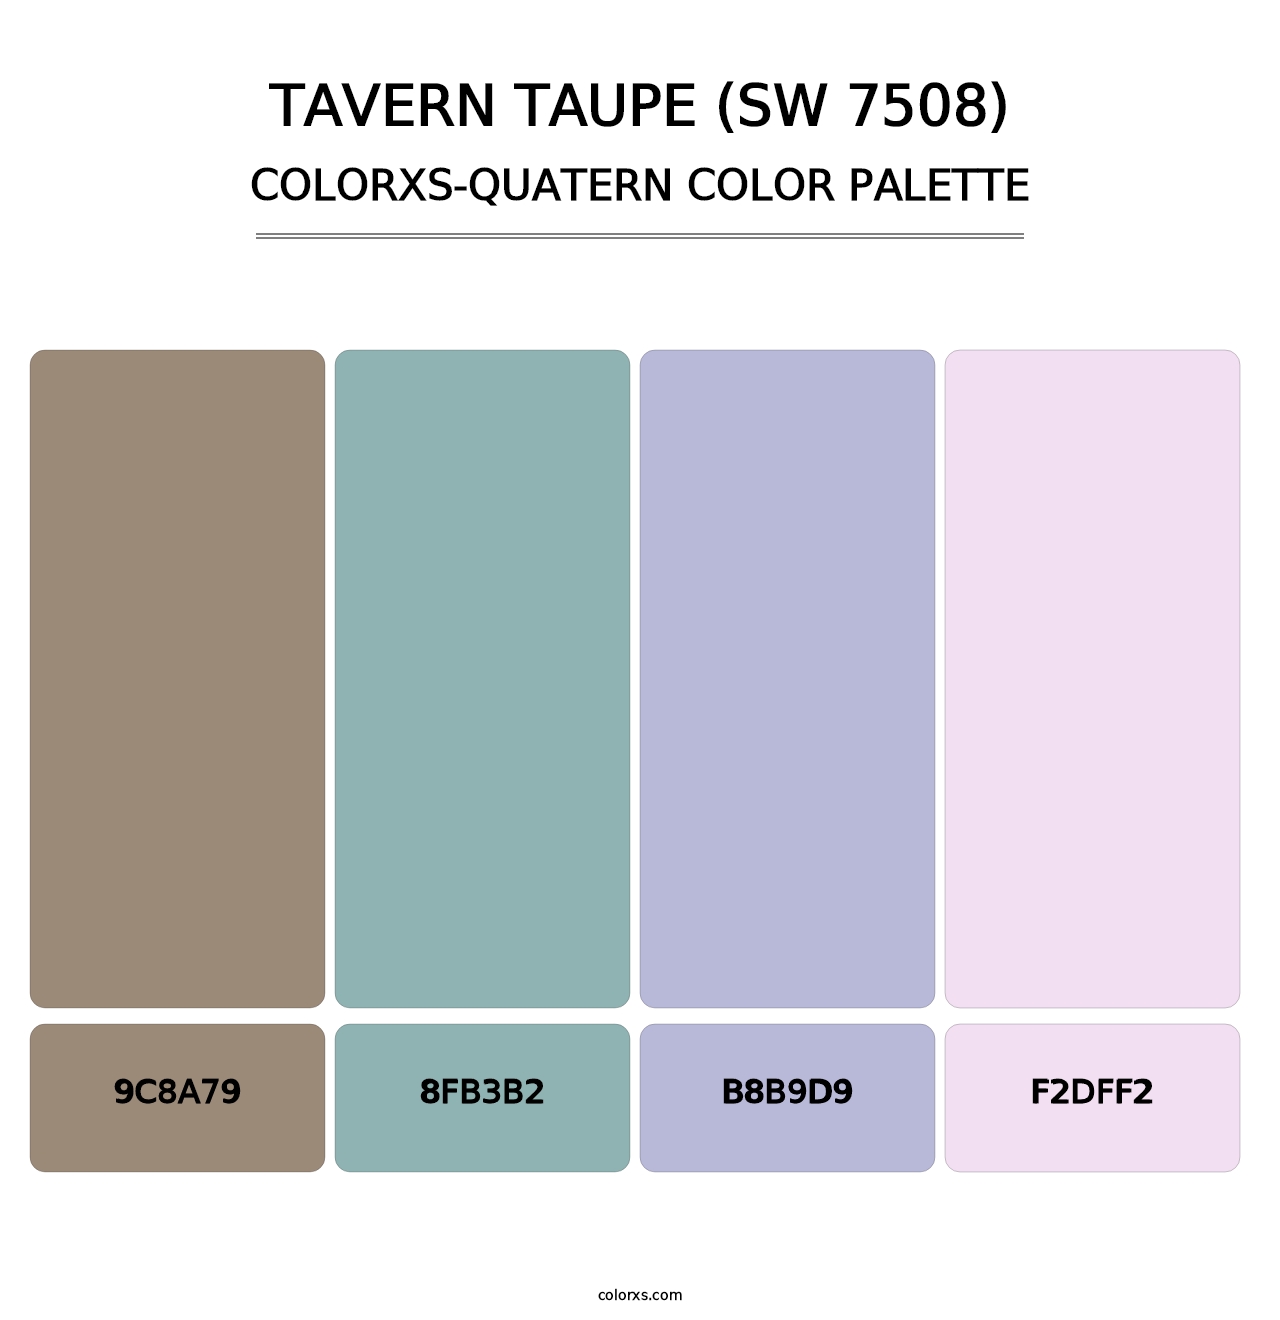 Tavern Taupe (SW 7508) - Colorxs Quatern Palette